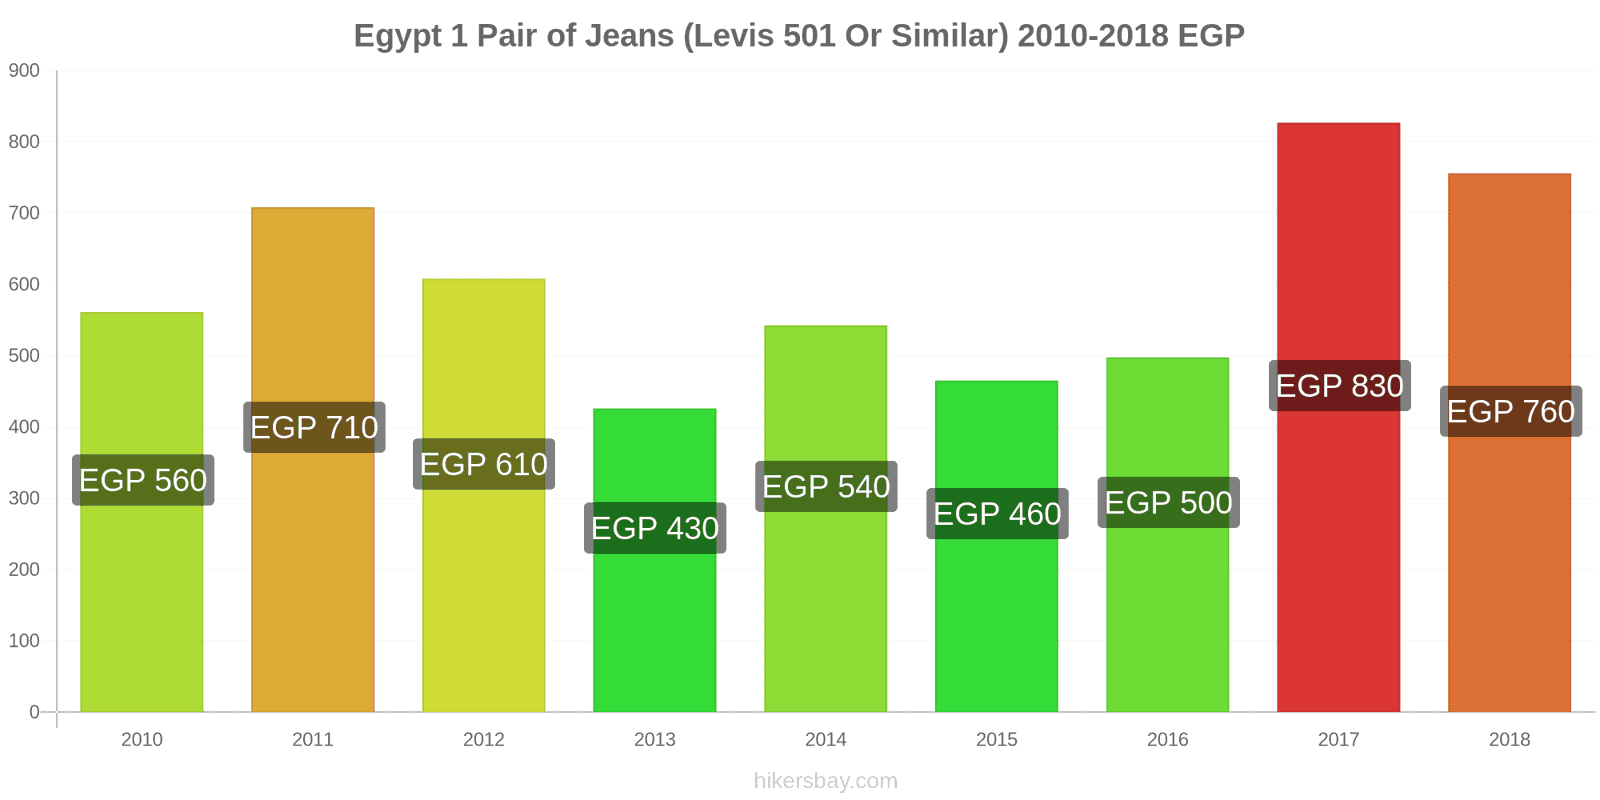 Egypt price changes 1 pair of jeans (Levis 501 or similar) hikersbay.com